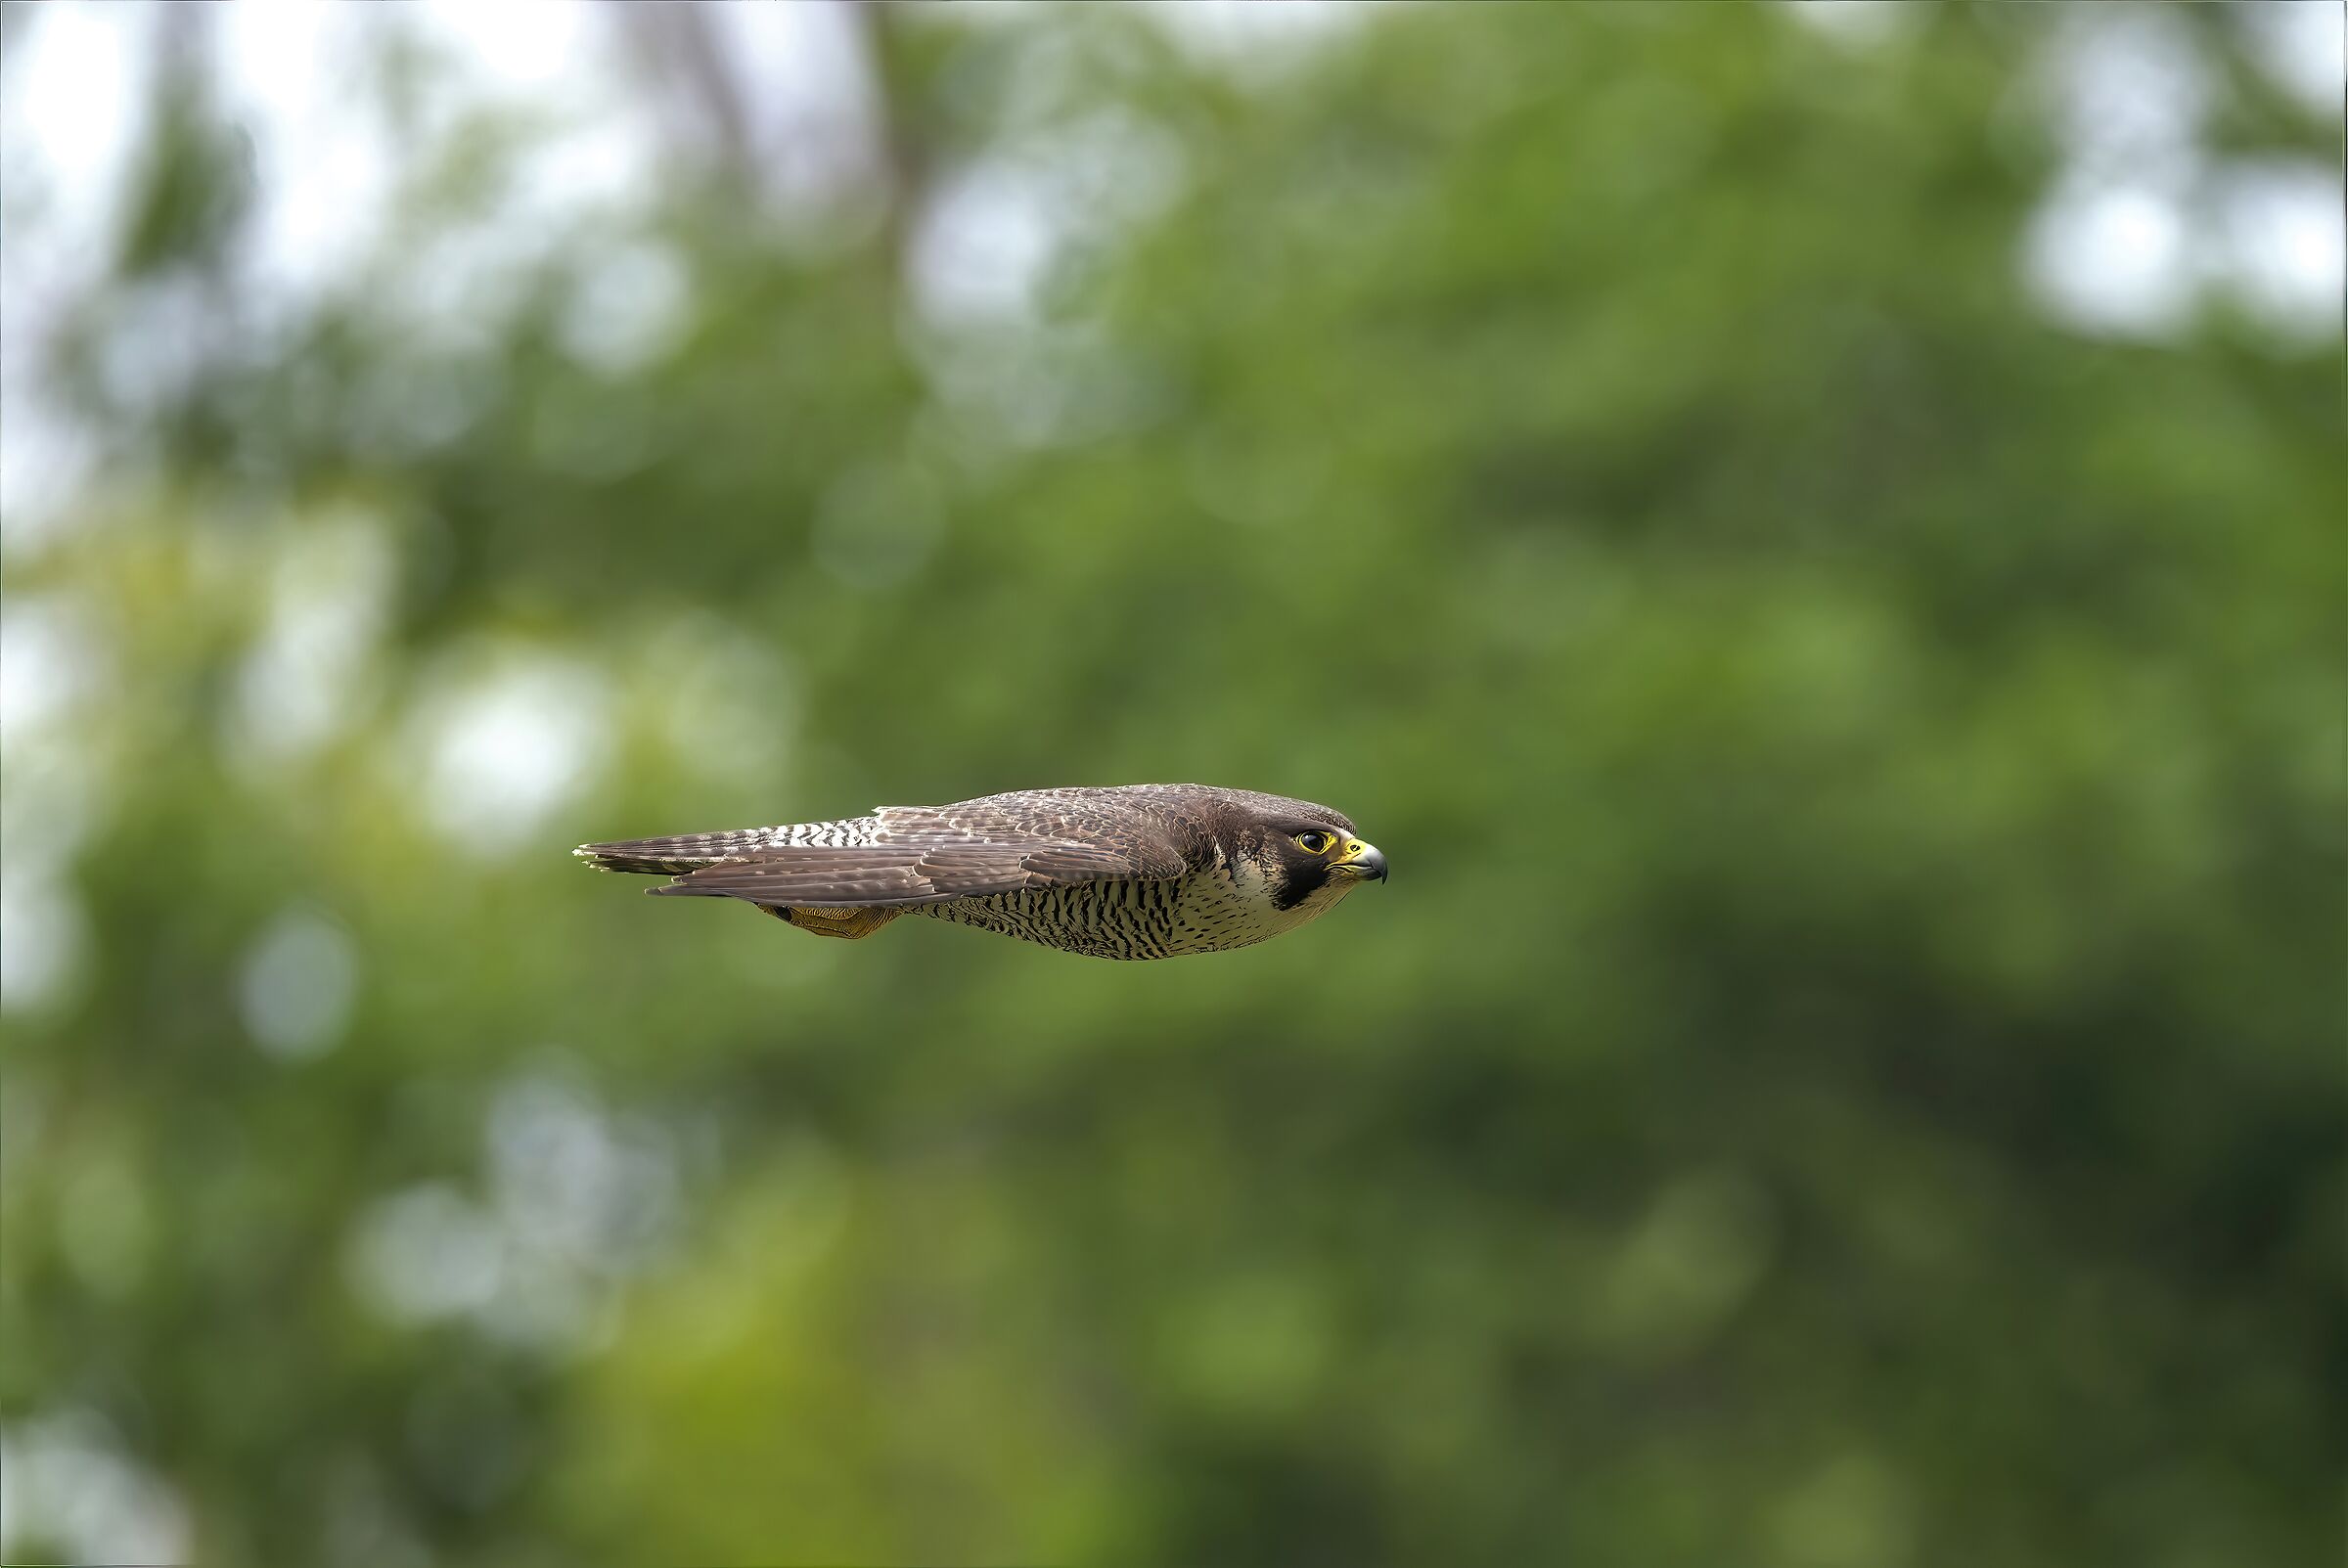 The missile at 350km per hour Peregrine falcon in dive...